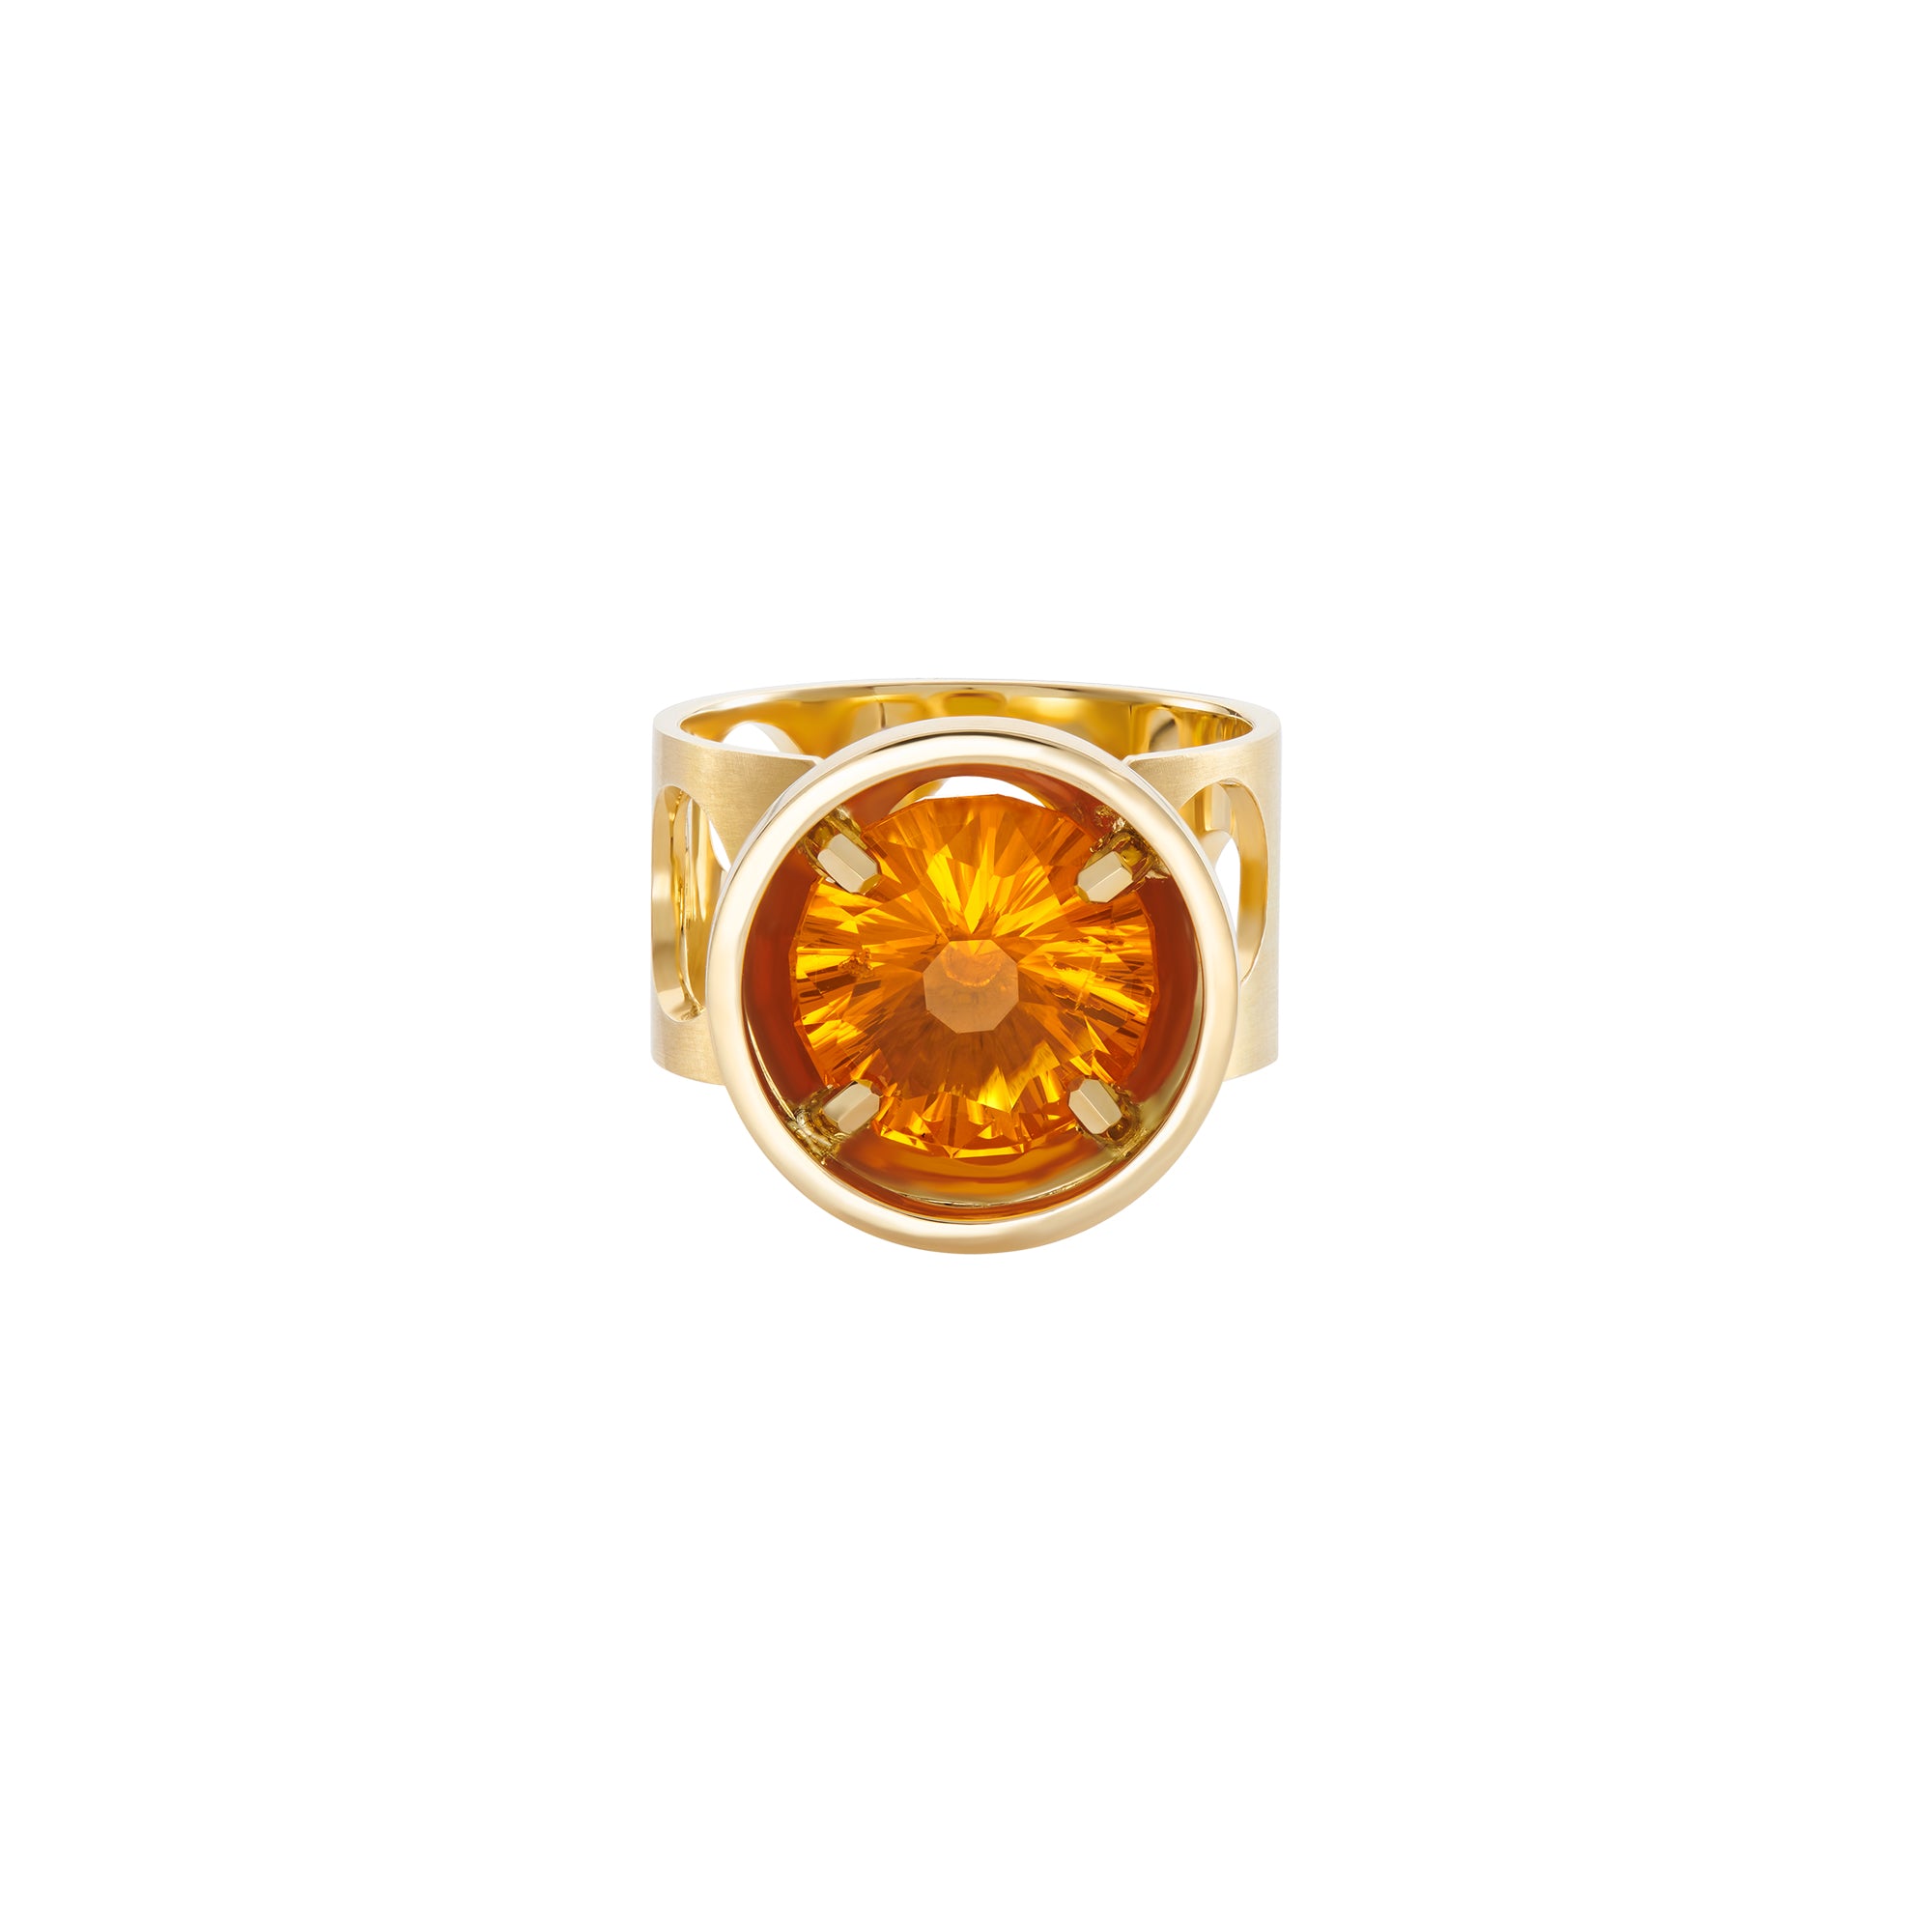 Top perspective photograph on white background BETELGEUSE FIRE OPAL RING in 18 carat gold and special cut fire opal cut by Martin Prinsloo, photographed by Rudolf Cinovkis.